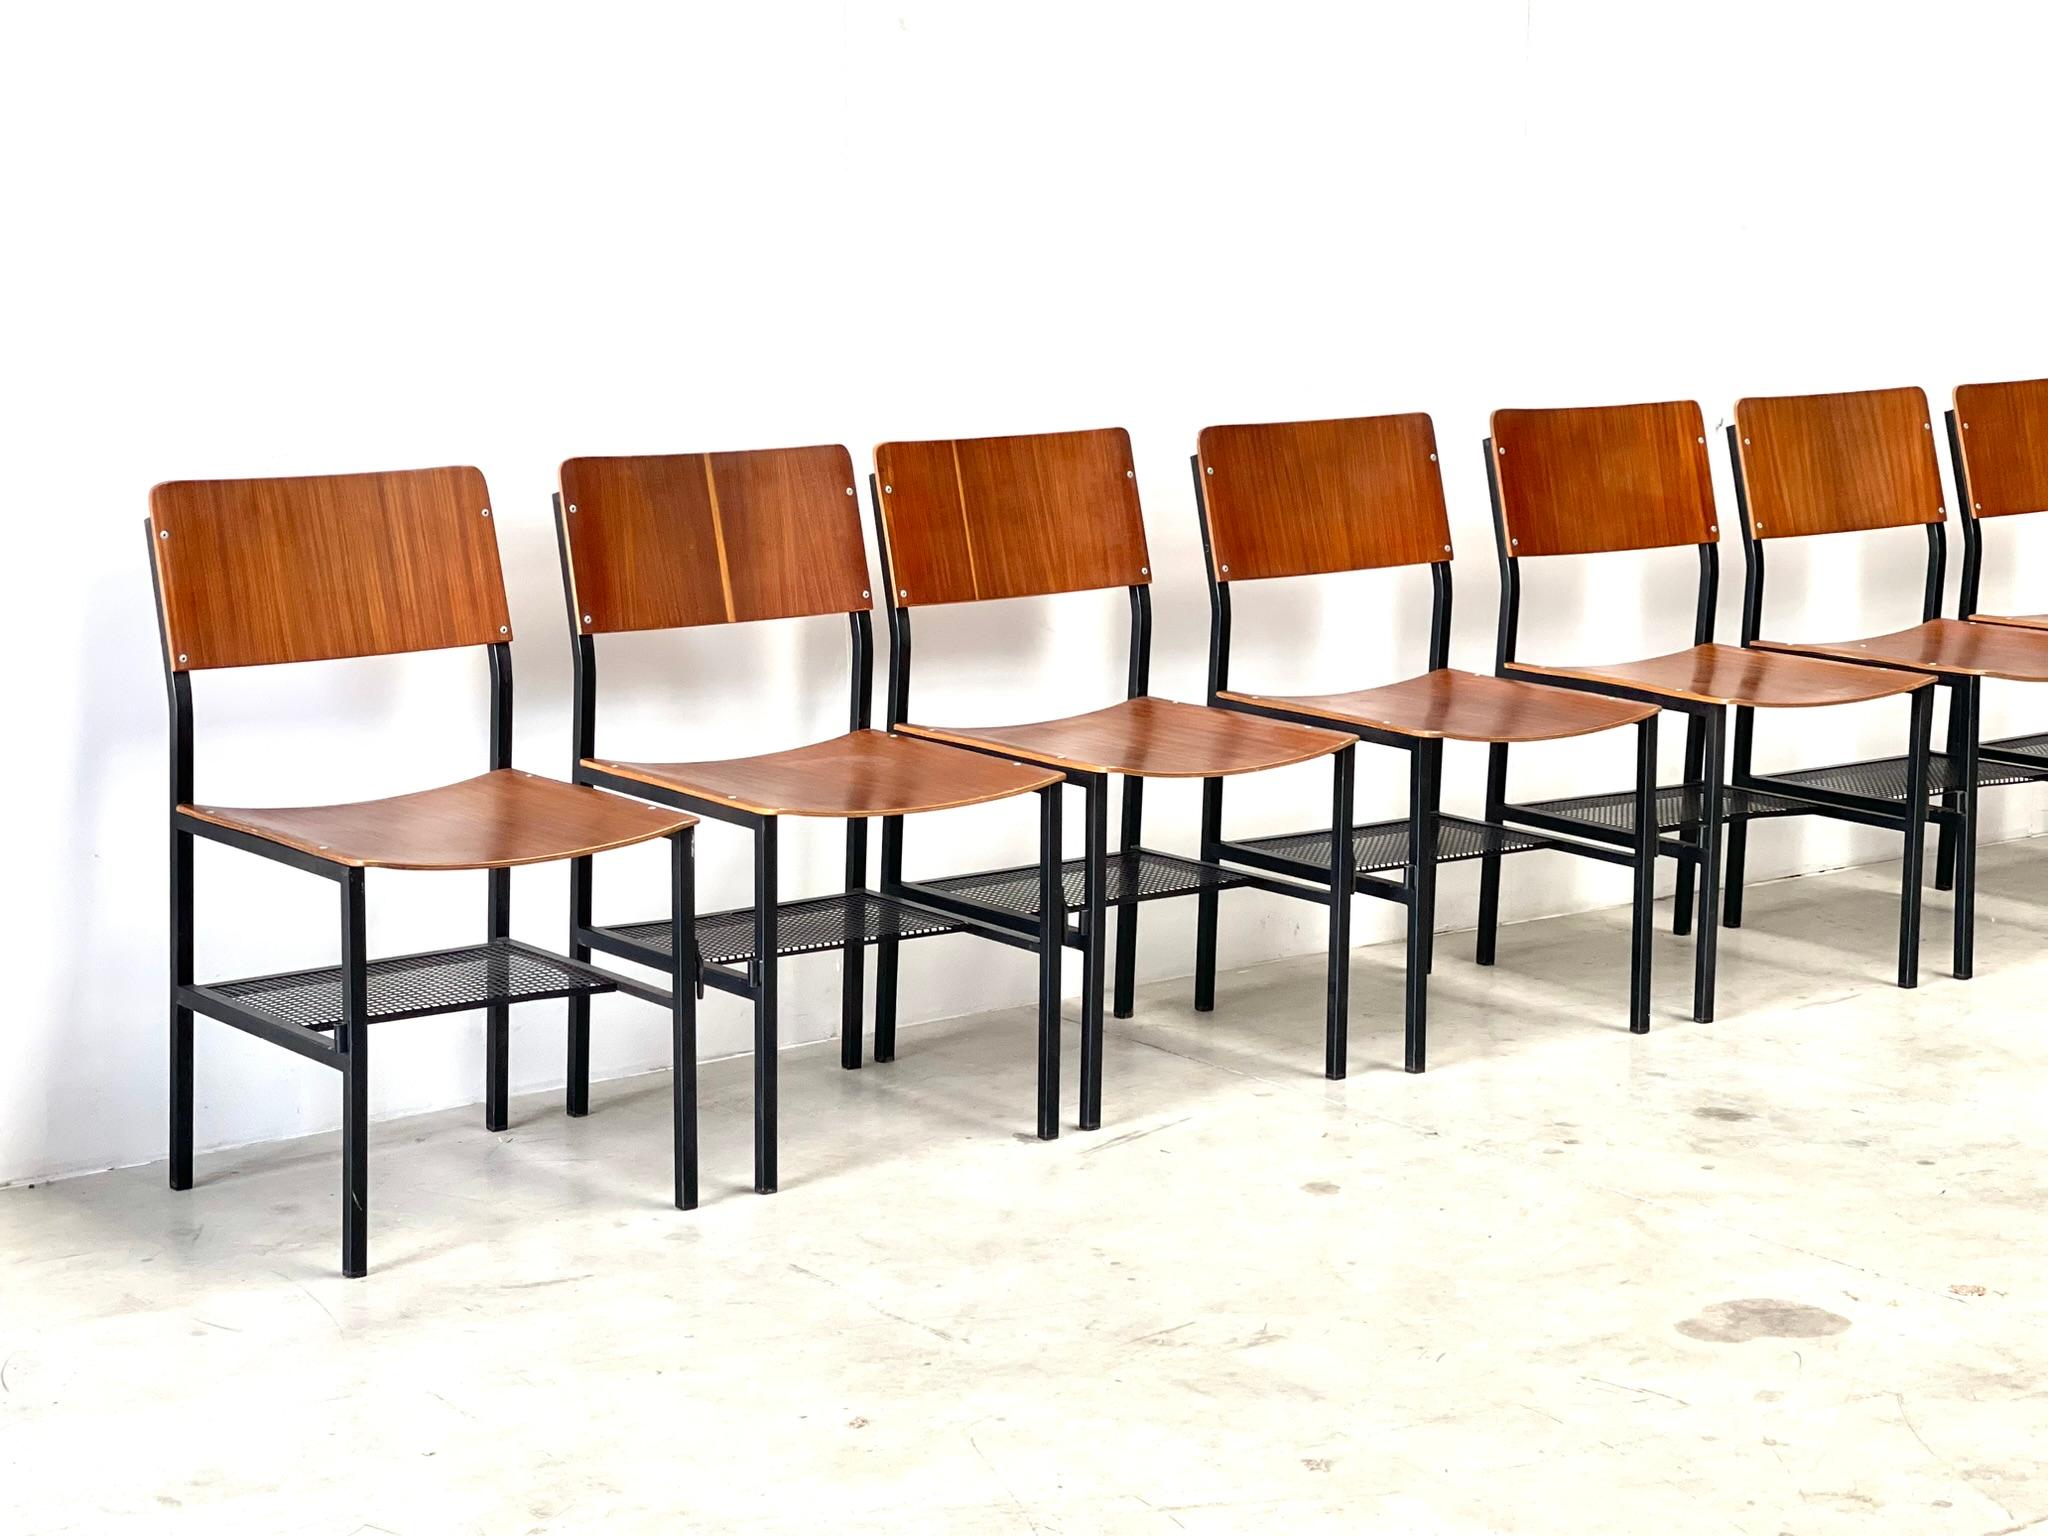 Set of eight modernist dining chairs
Large set of dining room chairs from a 1970s church. The chairs have a very modernist and simplistic feel. They were made in the 1970s in the Netherlands by an unknown manufacturer. These chairs are perfect for a